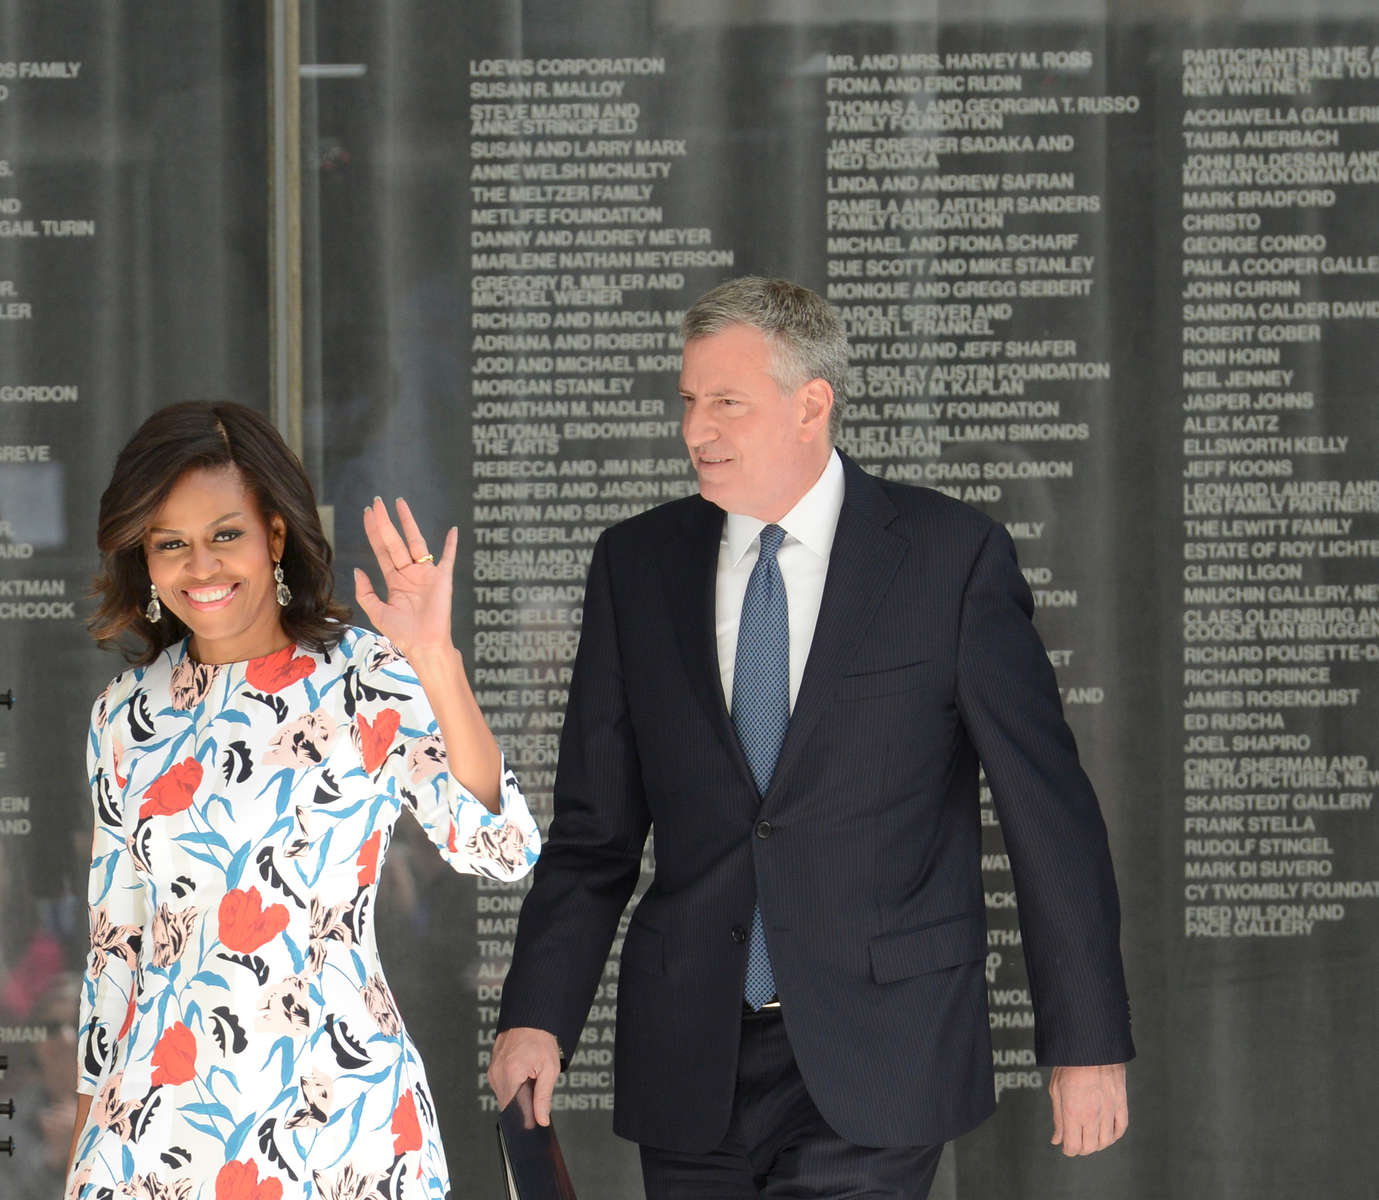 First Lady of the United States of America Michelle Obama and New York City Mayor Bill de Blasio were joined by Adam D. Weinberg, Alice Pratt Brown Director, Whitney Museum of American Art, Architect Renzo Piano, Robert J. Hurst, Co-Chairman of Whitney Board of Trustees, Brooke Garber Neidich, Co-Chairman of Whitney Board of Trustees, Neil G. Bluhm, President of Whitney Board of Trustees, Flora Miller Biddle, Honorary Chairman of Whitney Board of Trustees and granddaughter of Museum founder Gertrude Vanderbilt Whitney, Matana Roberts, composer and alto saxophonist, performing a commissioned musical work, Incantation, The Wooster Group, renowned experimental theatre company performing the ribbon-cutting, and teens from the Whitney's Youth Insights Program at the Whitney Museum of American Art dedication ceremony and official ribbon-cutting at 99 Gansevoort Street in Manhattan on Thursday, April 30, 2015. The Whitney Museum of American Art returns to downtown Manhattan where it was founded in 1930 by artist and philanthropist Gertrude Vanderbilt Whitney.